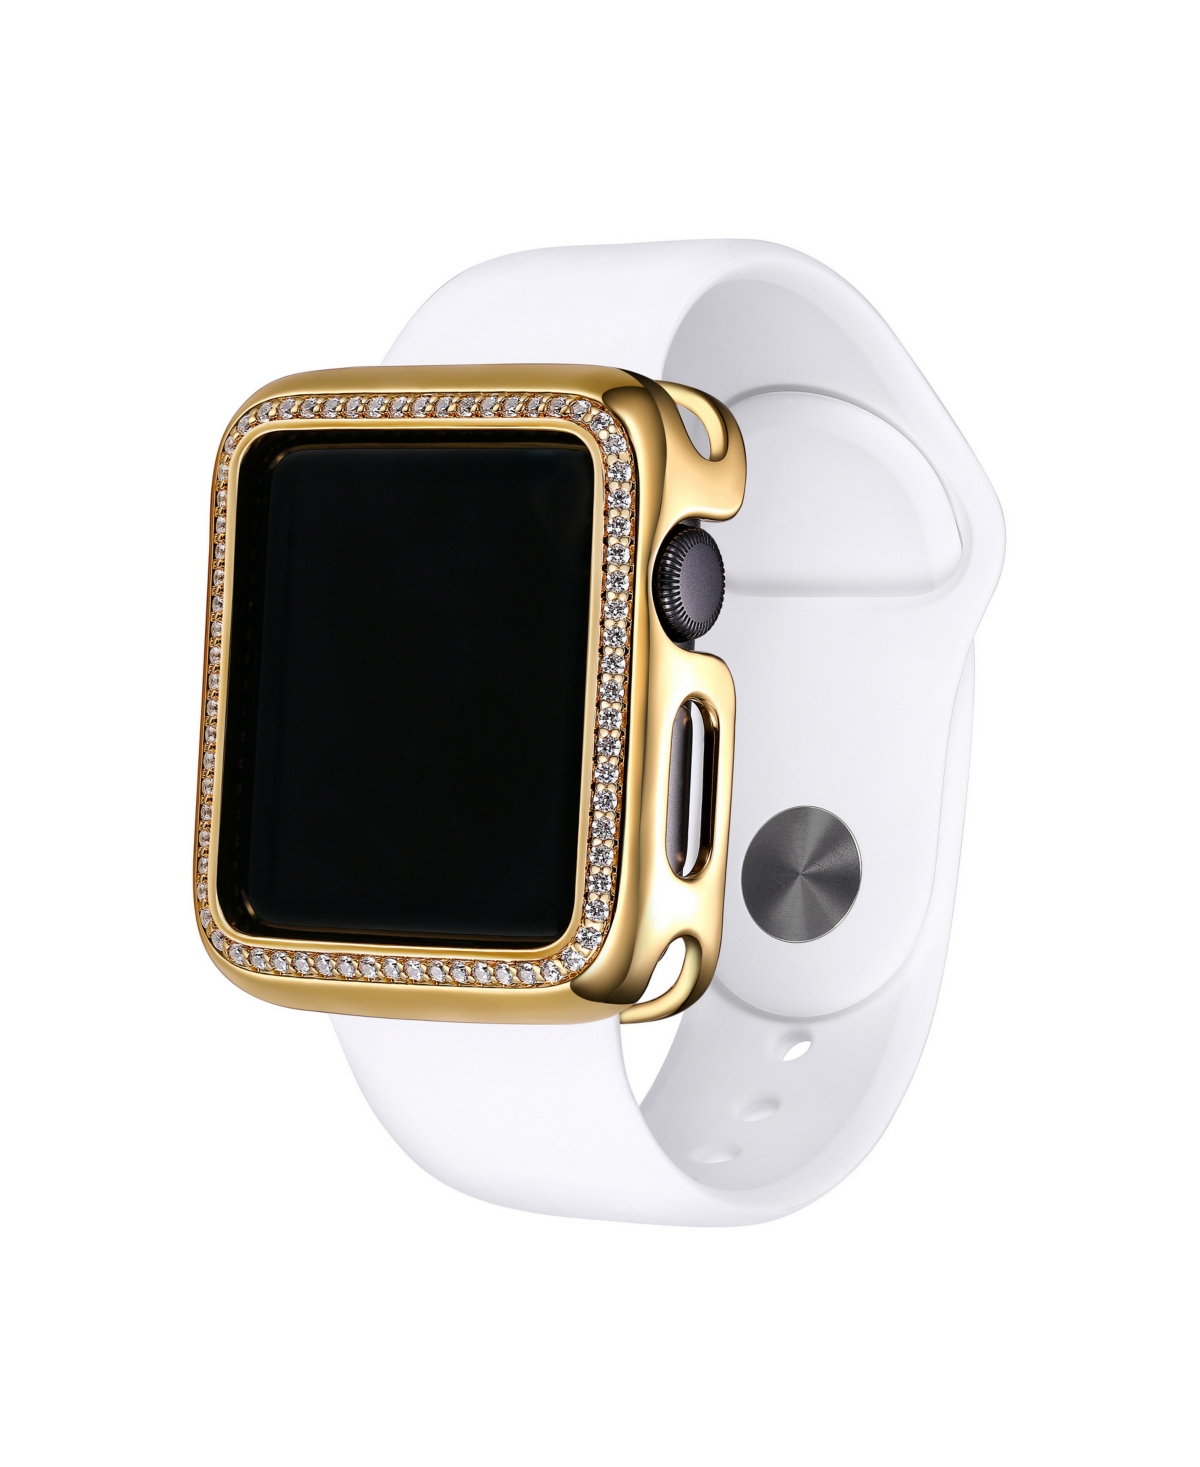 Halo Apple Watch Case, Series 1-3, 38mm - Gold-Tone